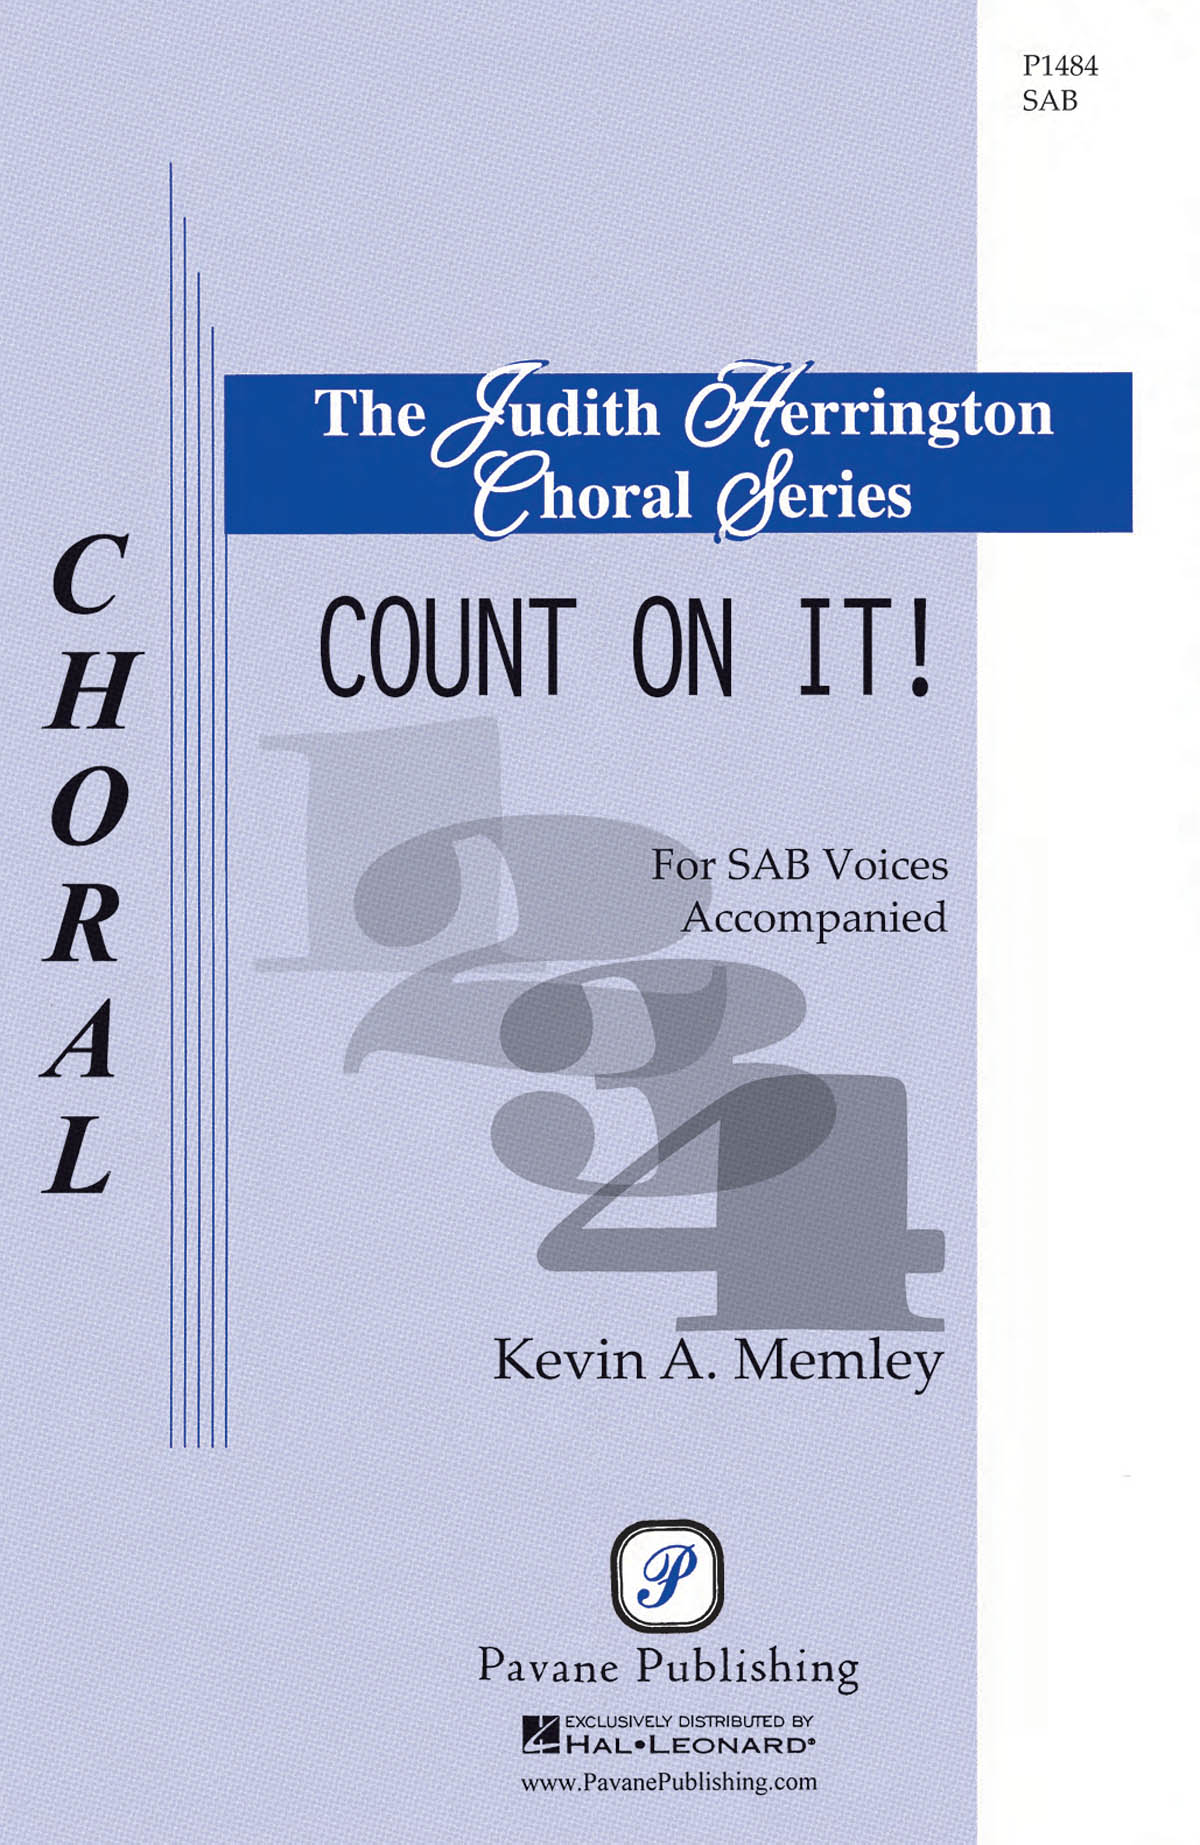 Kevin Memley: Count On It!